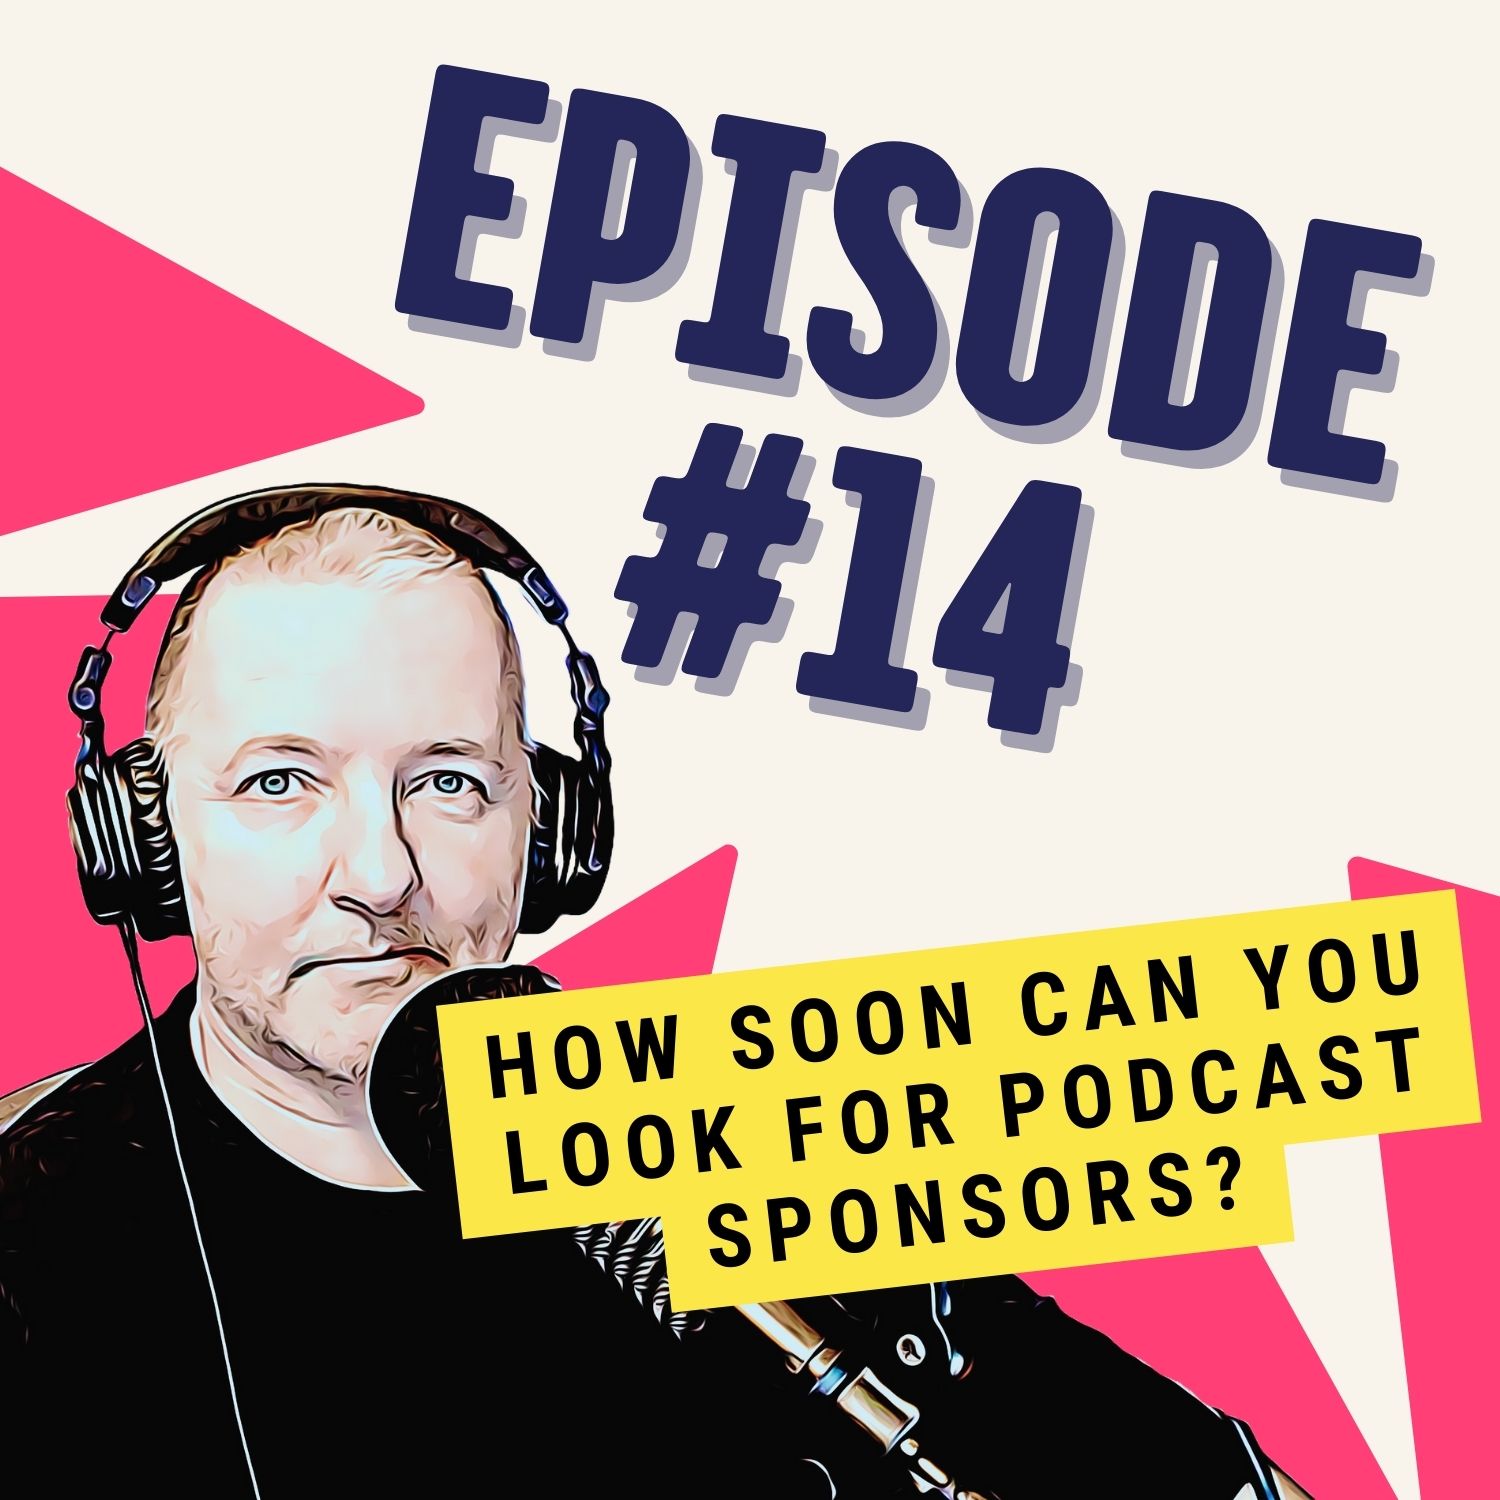 How Soon Can You Look for Podcast Sponsors?